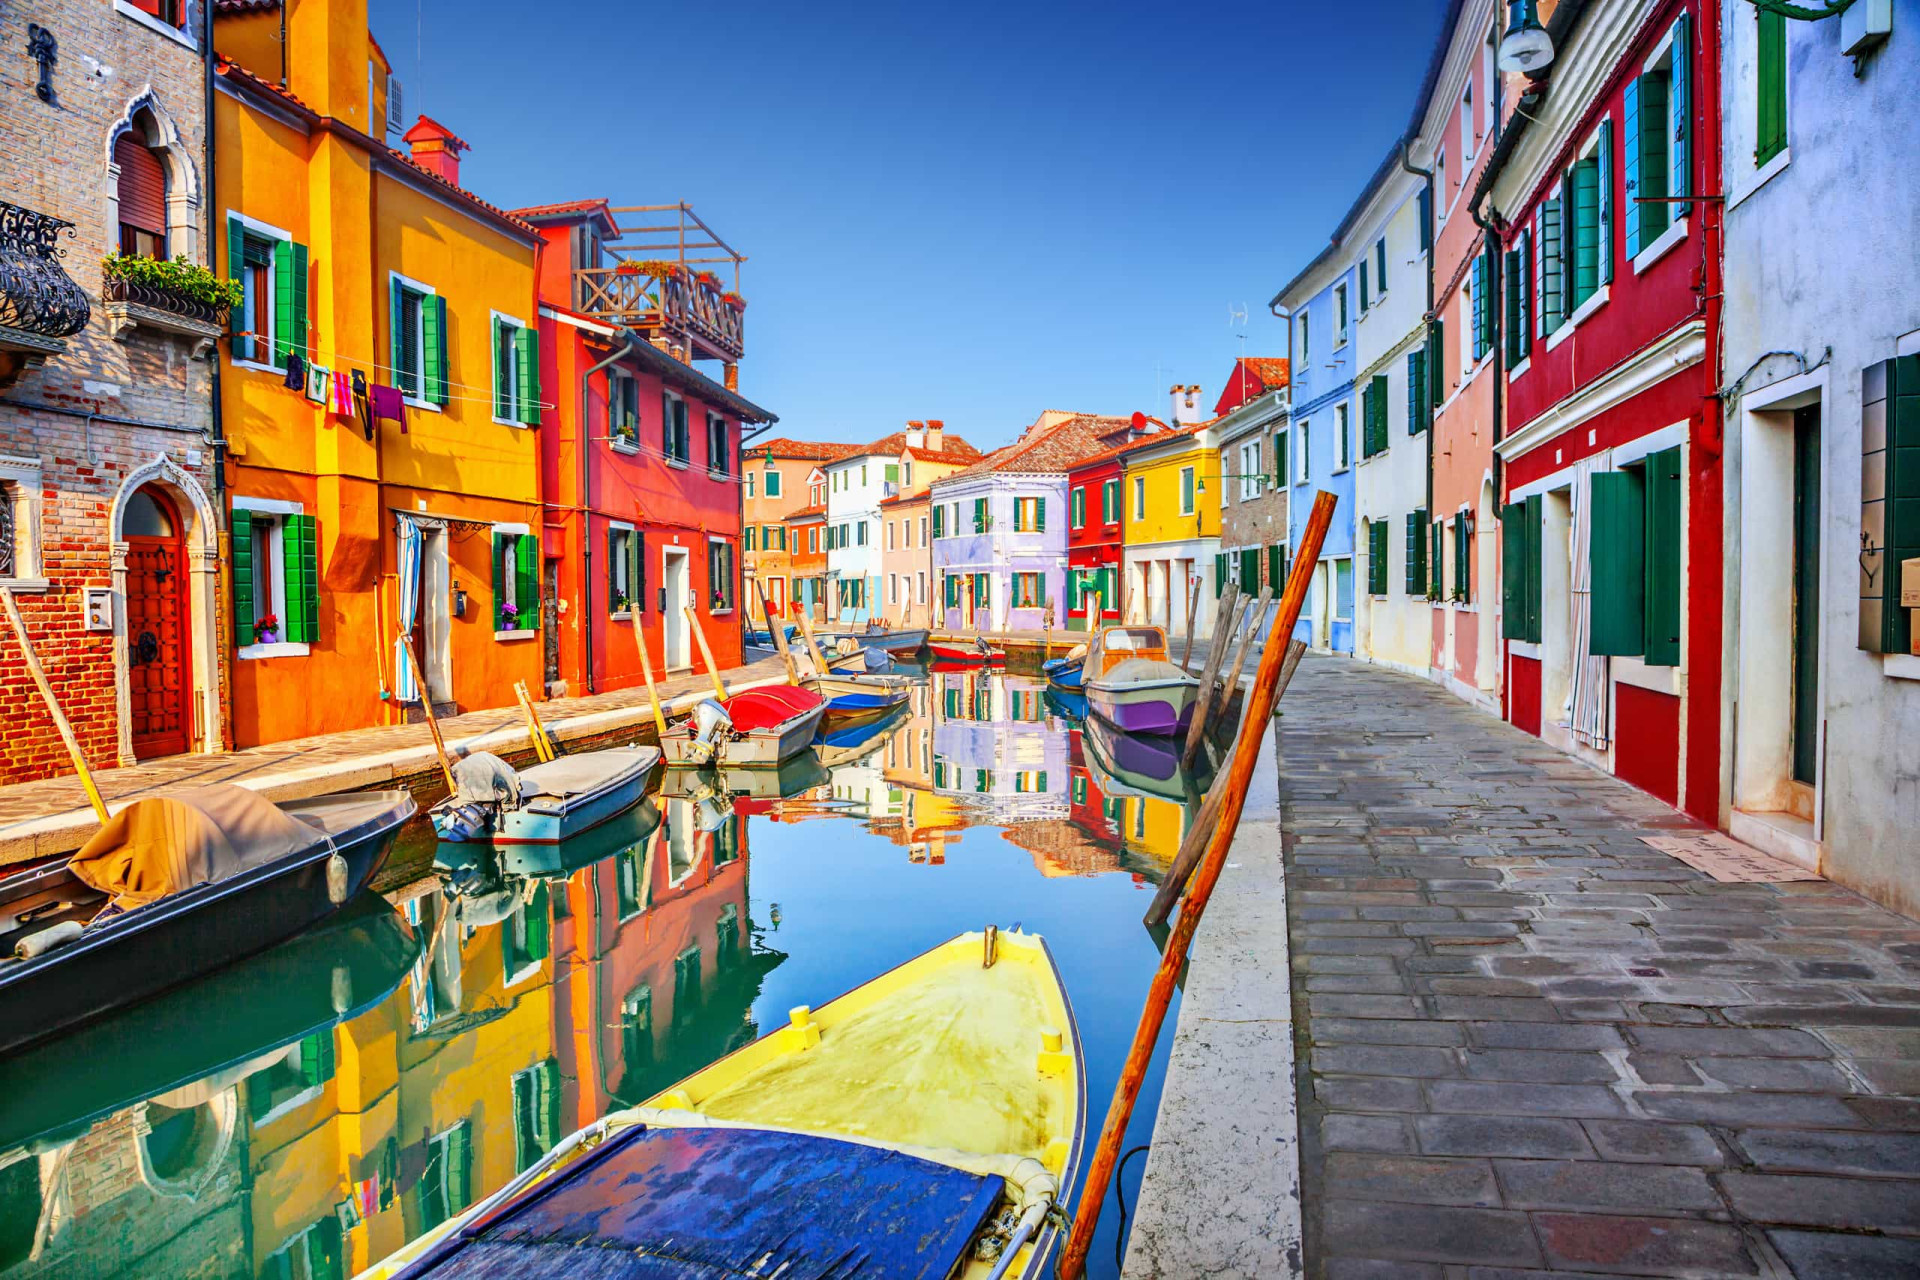 <p>Picturesque Burano is an island in the Venetian Lagoon that's drawn artists to its brightly colored fishermen's houses for centuries. Burano is also known for its traditional lace-making industry.</p><p>You may also like:<a href="https://www.starsinsider.com/n/299128?utm_source=msn.com&utm_medium=display&utm_campaign=referral_description&utm_content=481361v4en-en_selected"> Controversy! Movies that are better than their books </a></p>